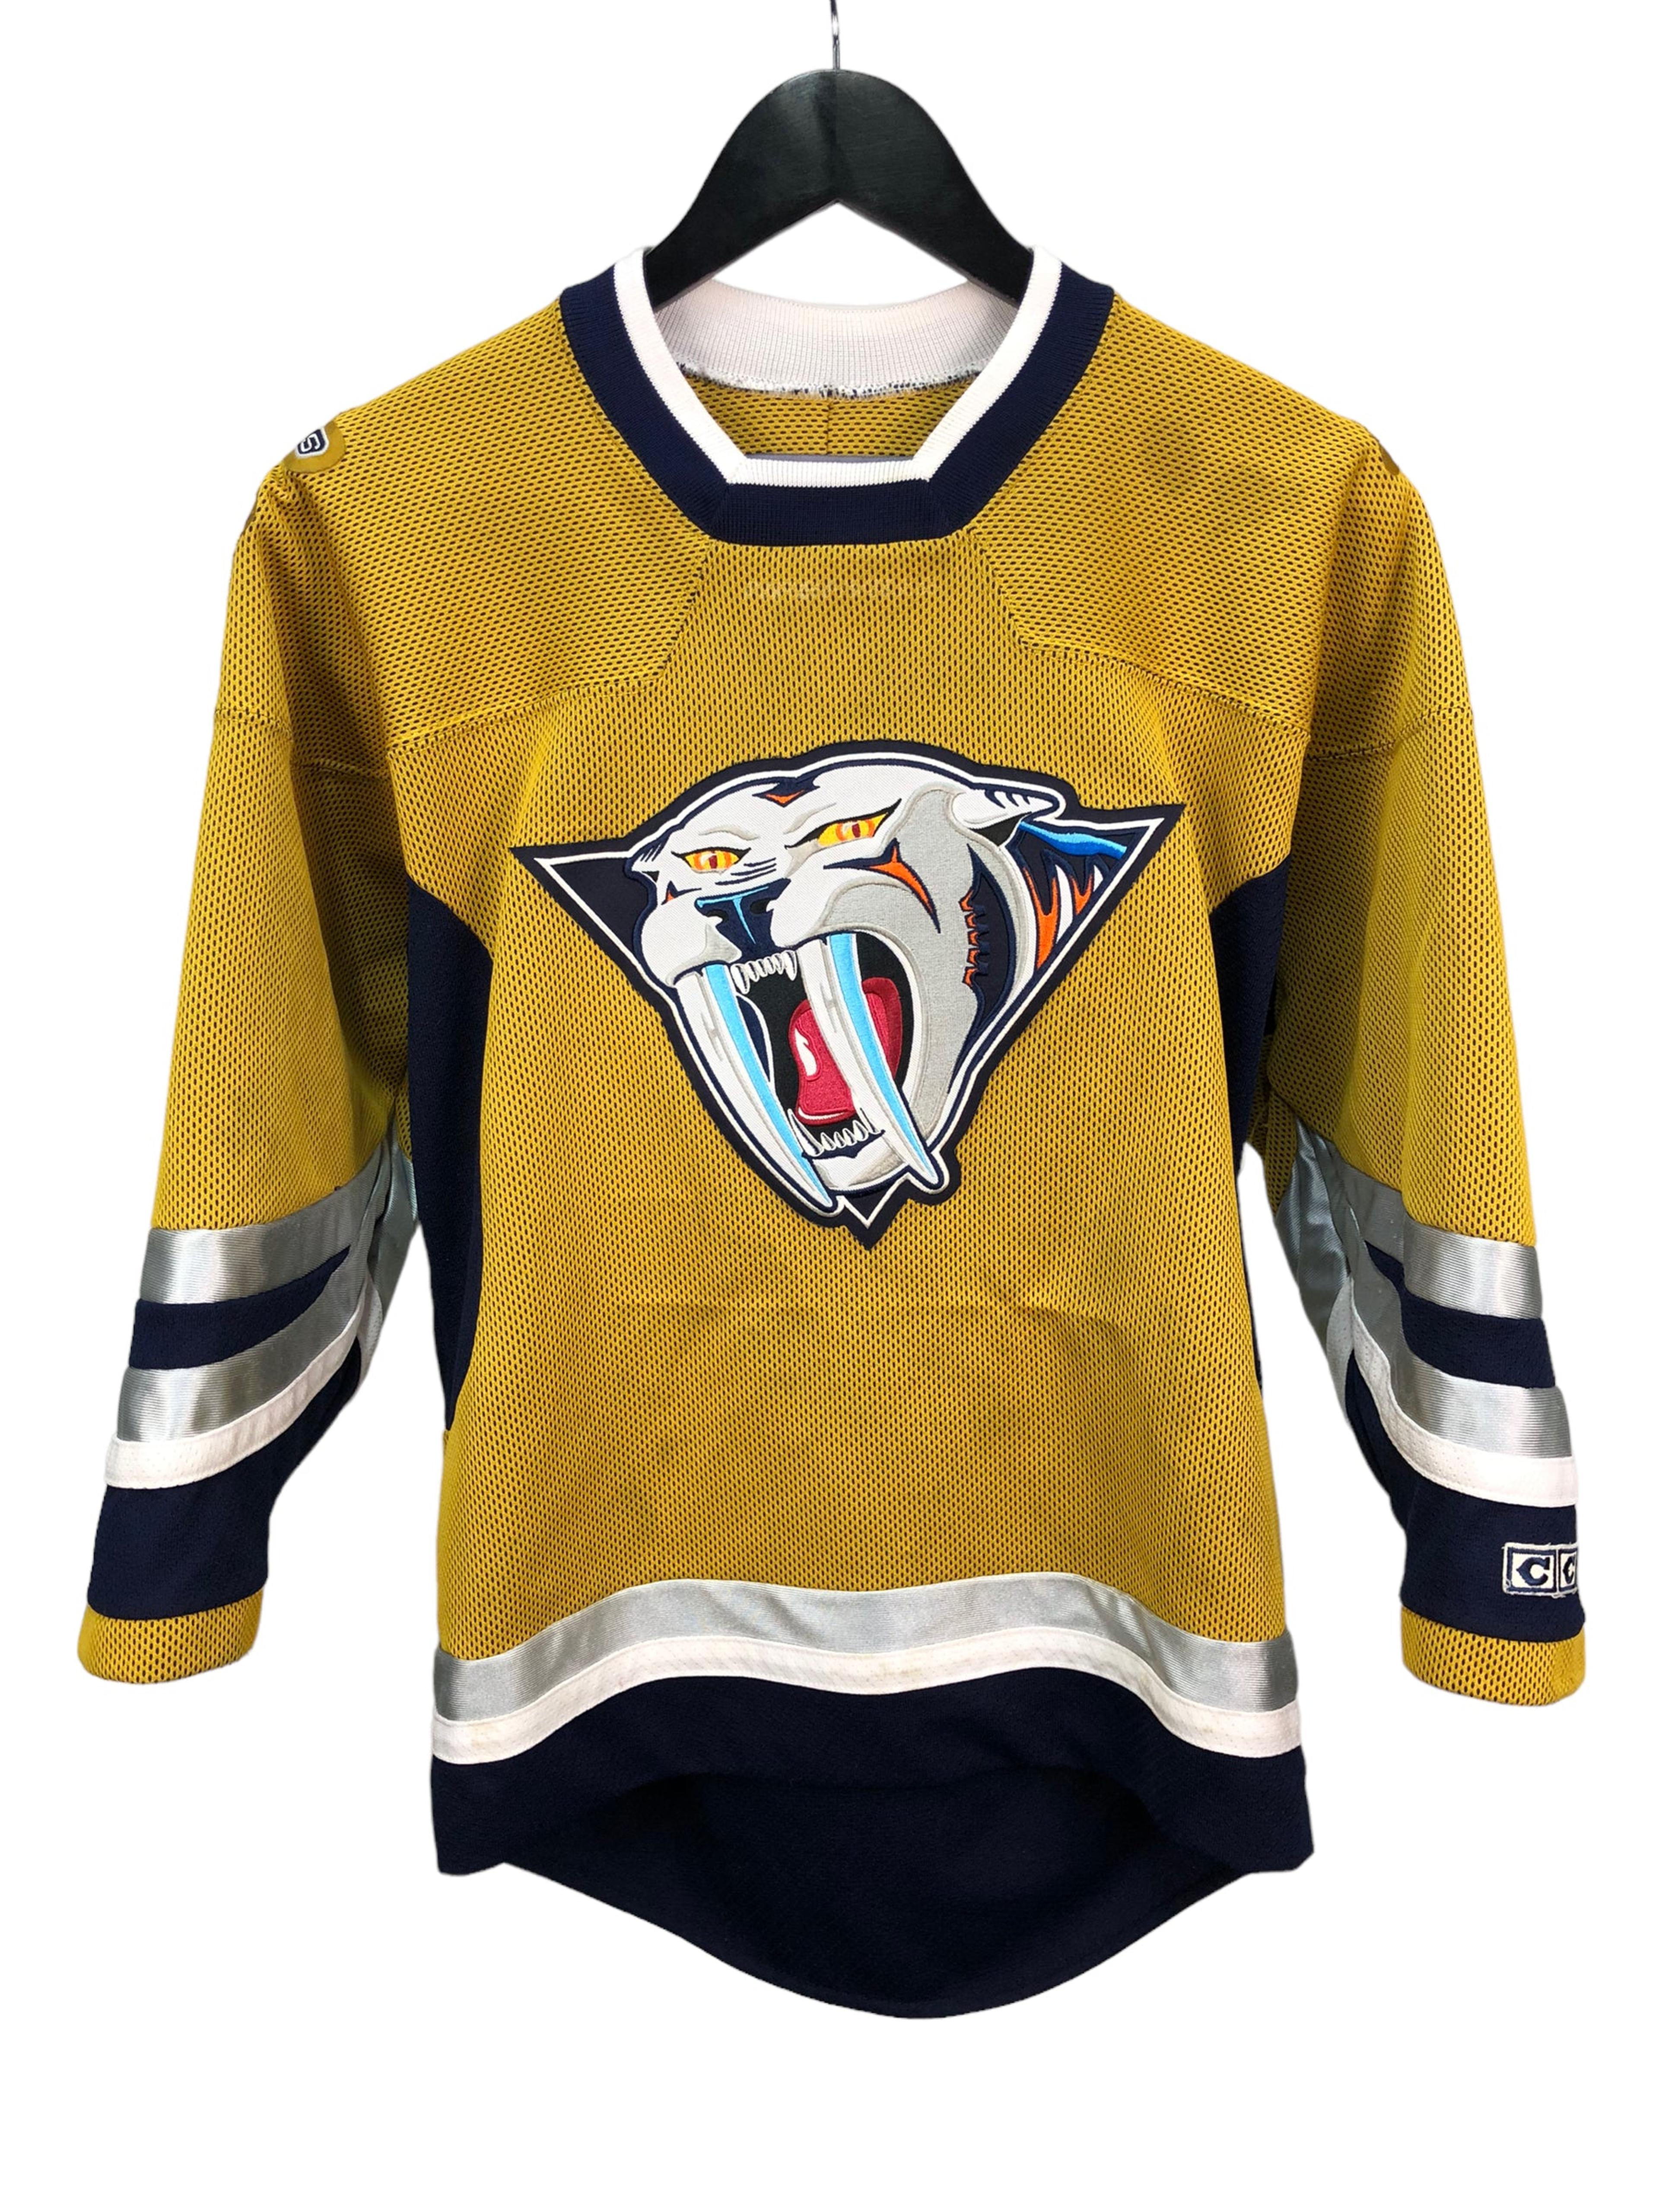 And the top-selling Nashville Predators jersey is